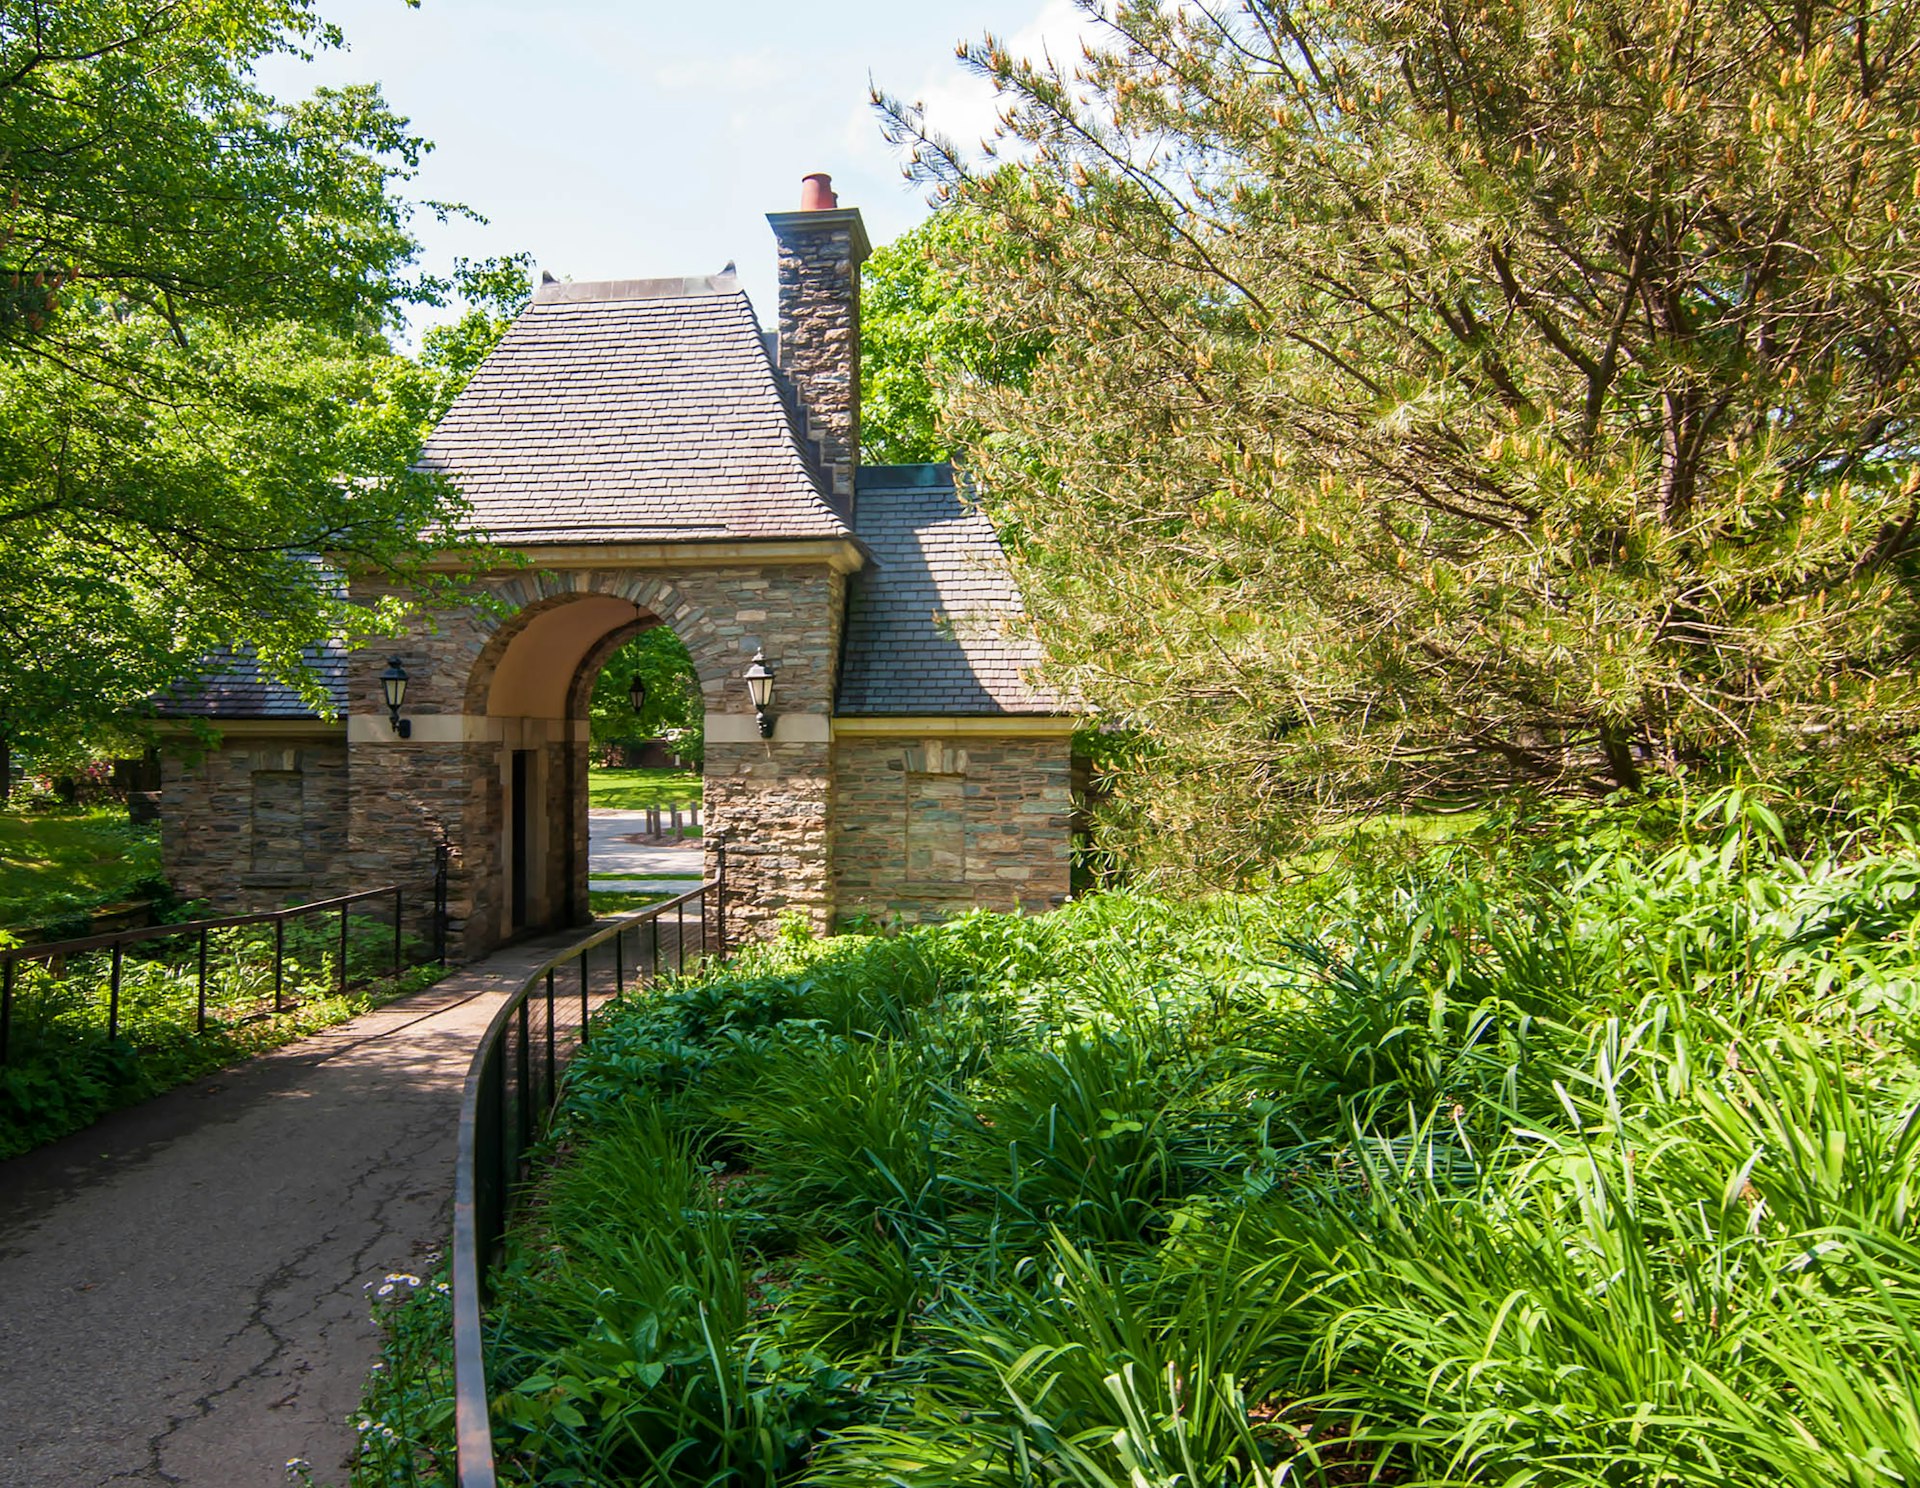 The brick gate house in Frick Park in Pittsburgh